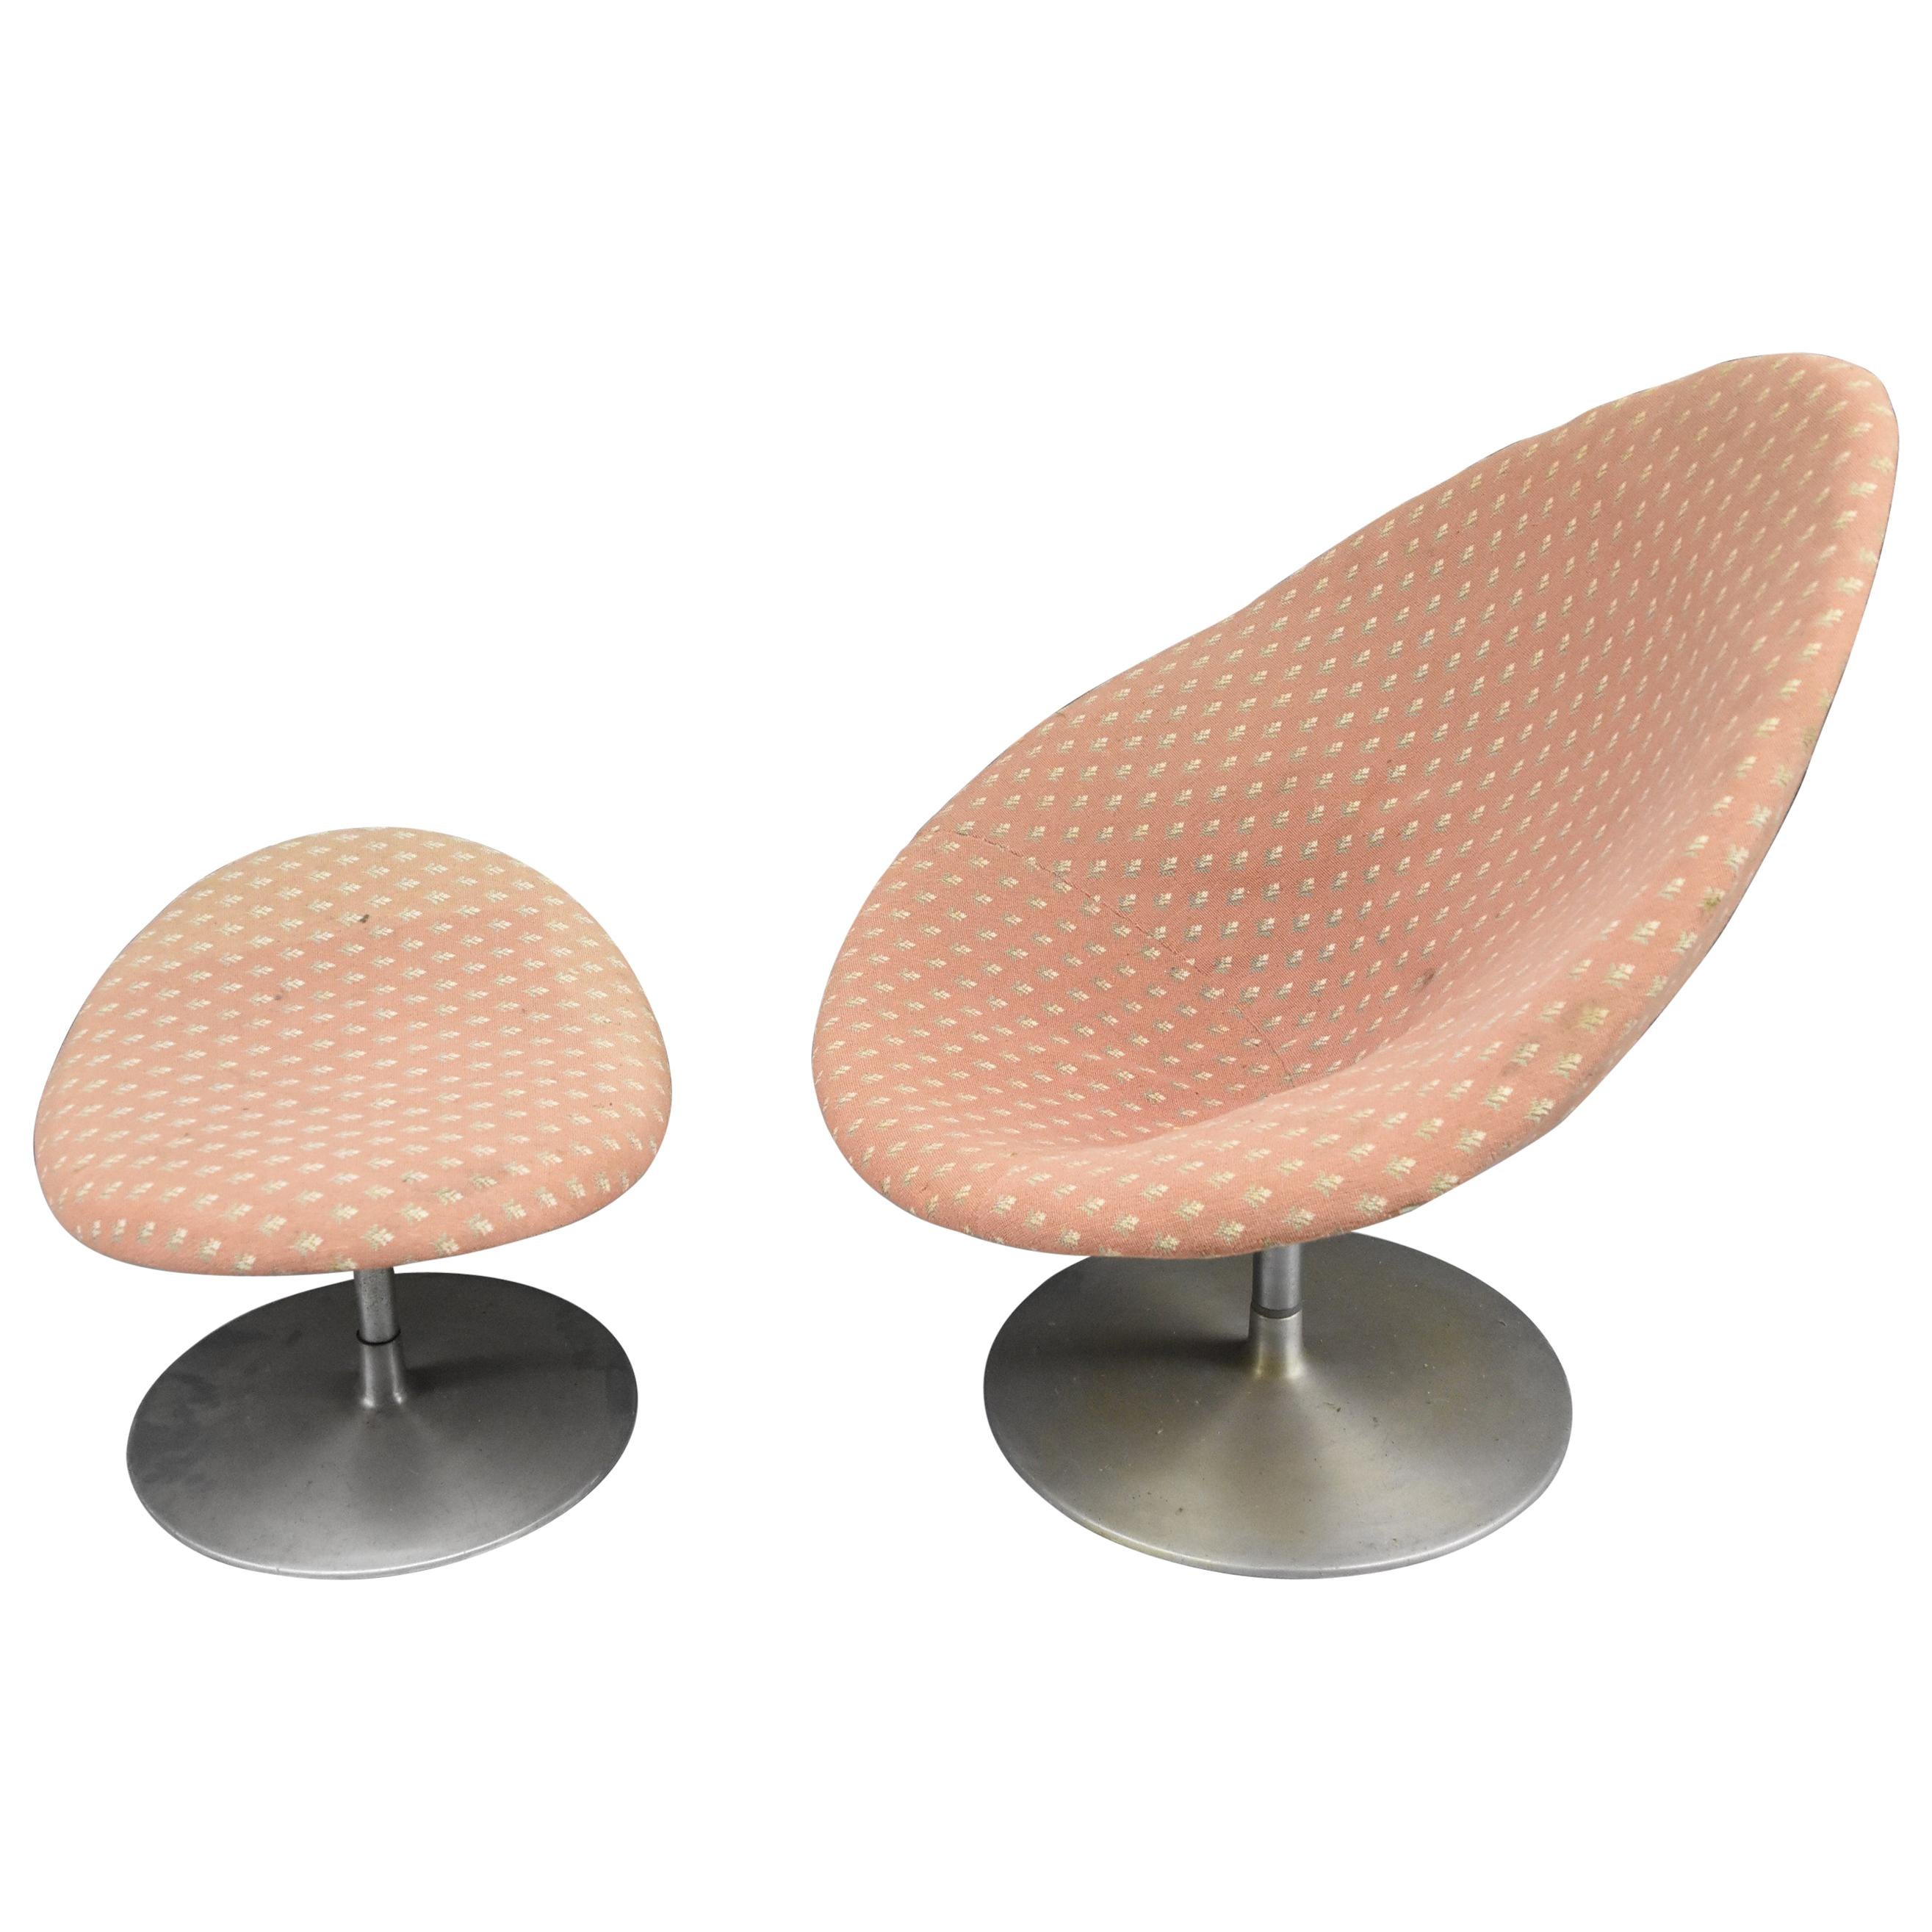 Pierre Paulin, Globe Seat F 422 and Its Ottoman in Steel and Fabric, circa 1960